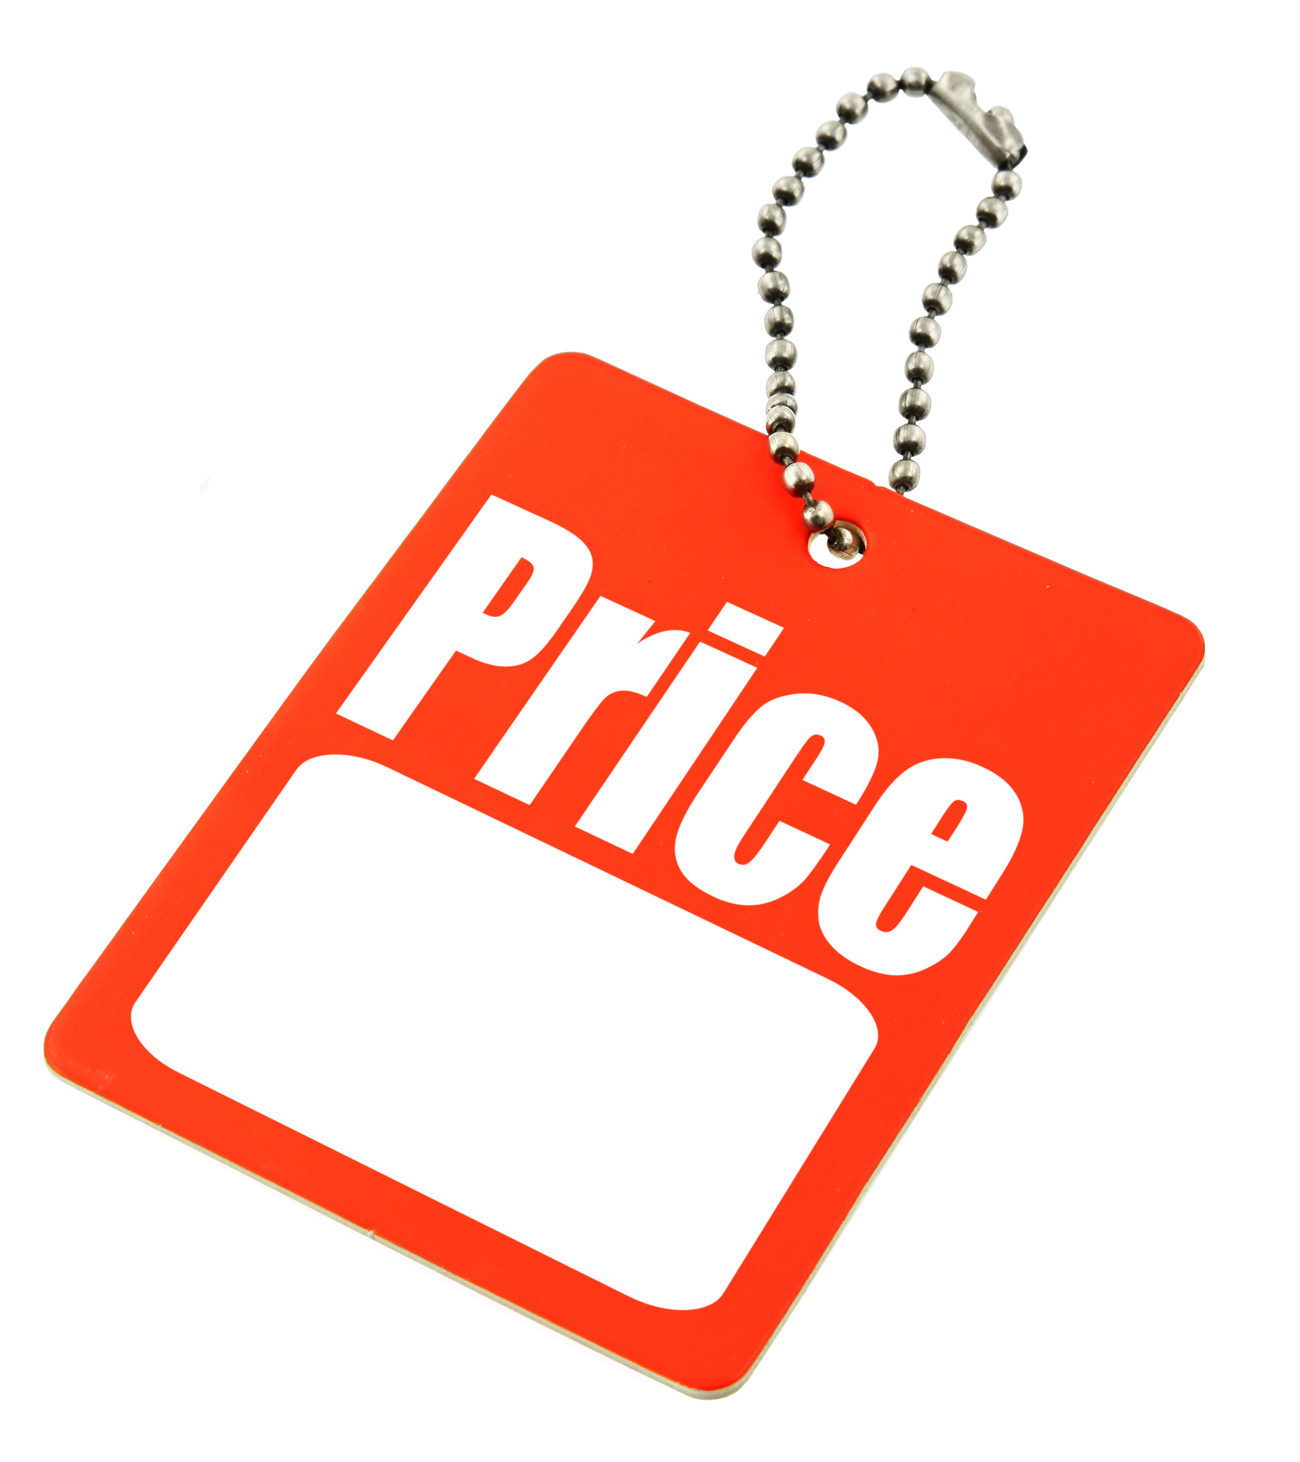 Price Tag Template - ClipArt Best